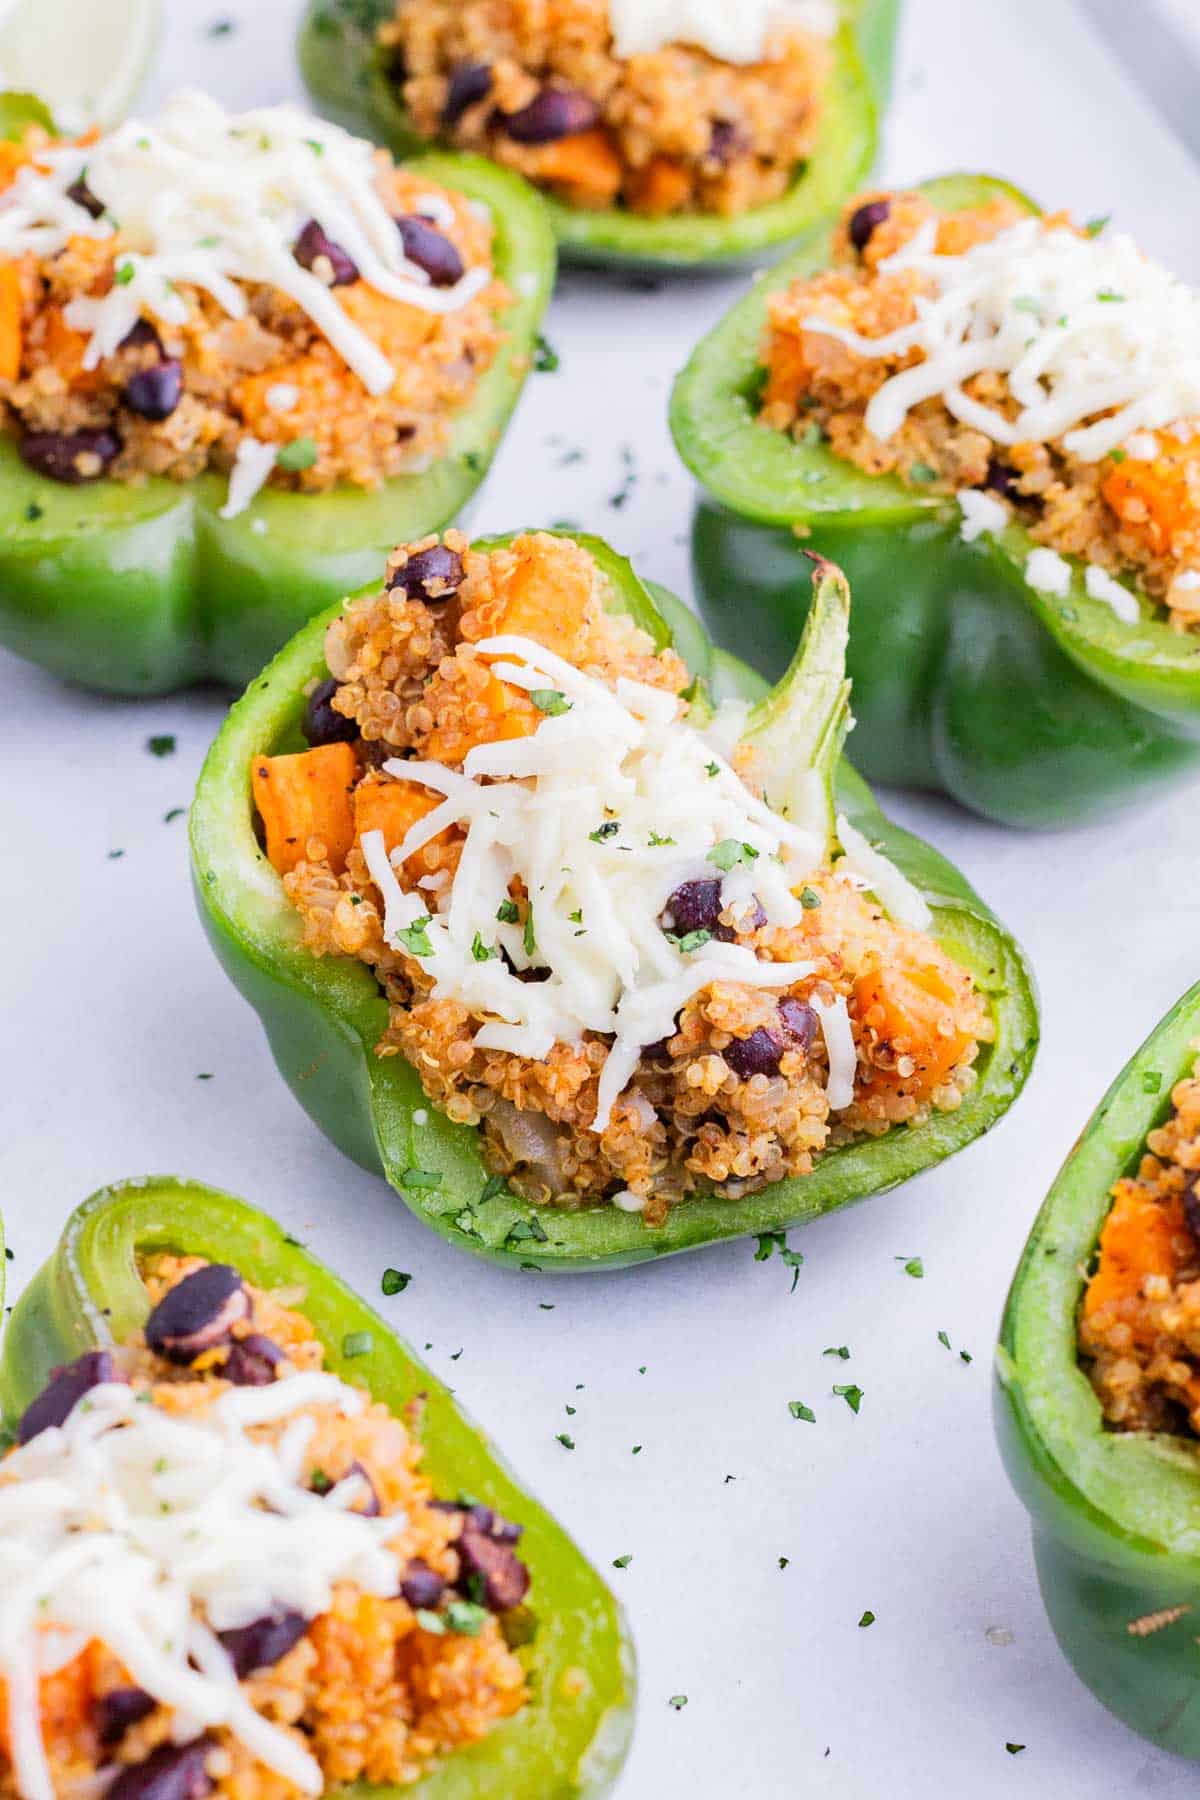 Bell peppers are stuffed with quinoa, black beans, and sweet potatoes.